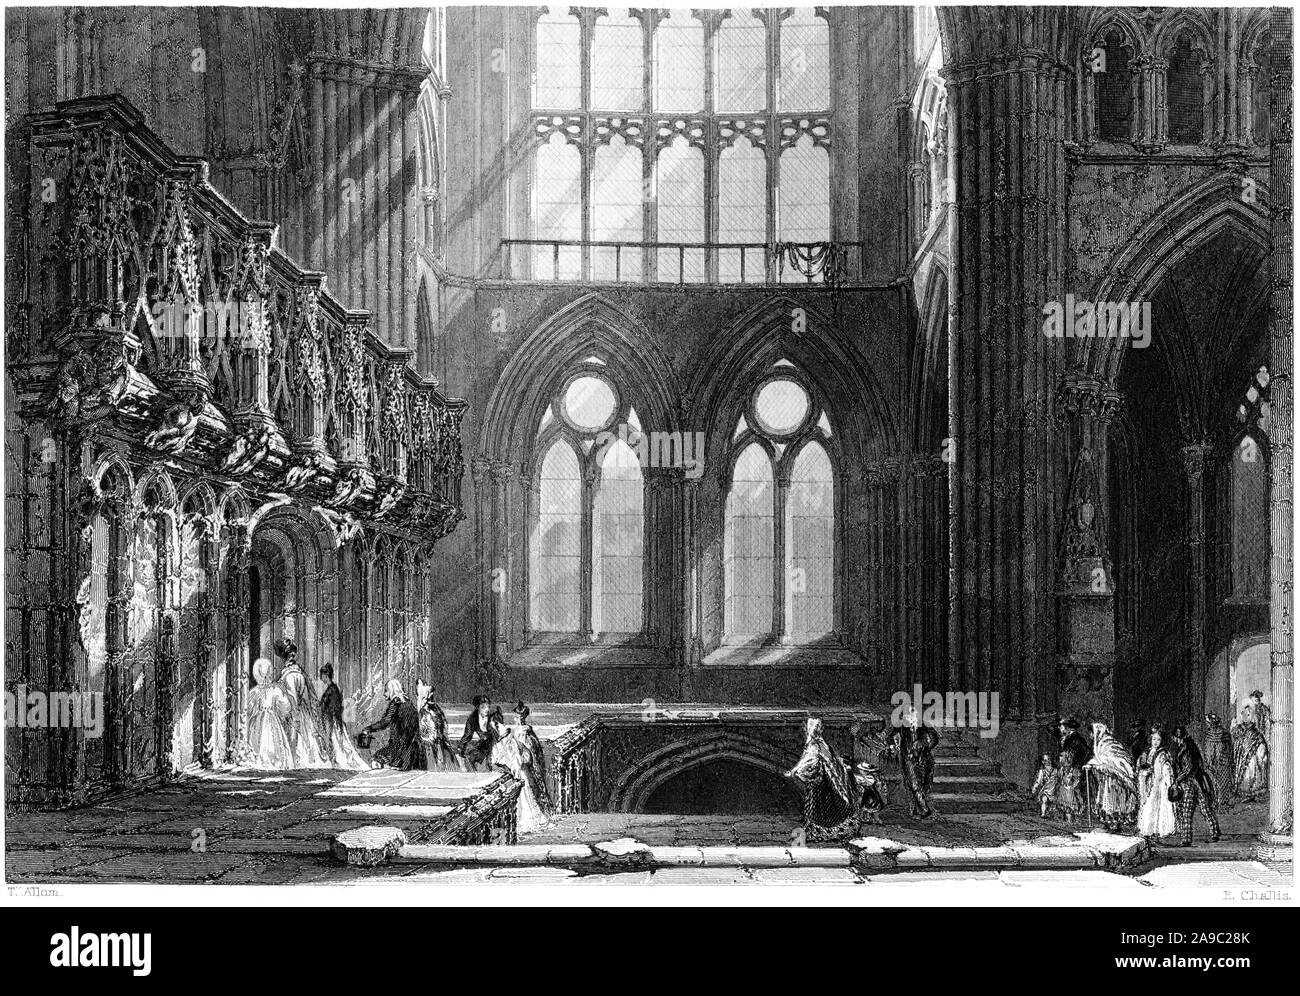 An engraving of Glasgow Cathedral Lanarkshire scanned at high resolution from a book printed in 1859.  Believed copyright free. Stock Photo